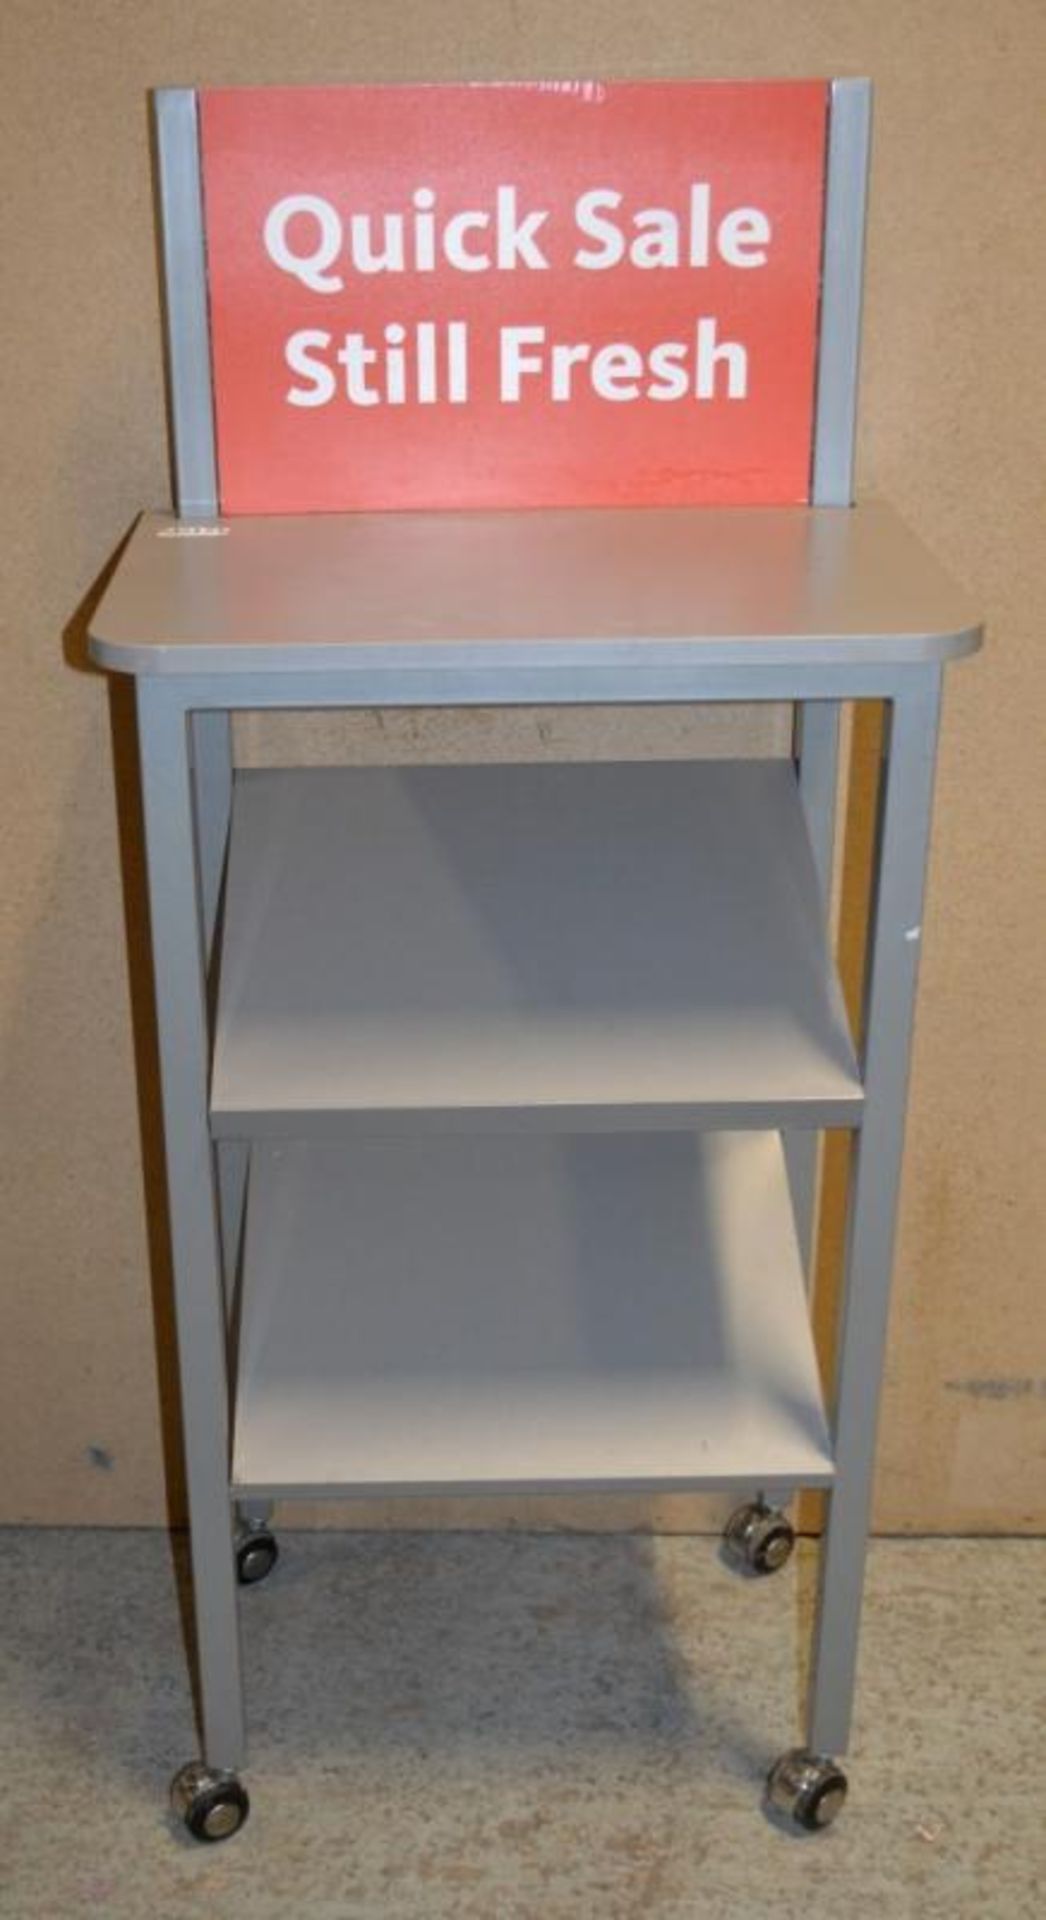 1 x Mobile Display / Work Stand in Grey - Includes Quick Sale Still Fresh Display - CL282 - Ref - Image 3 of 3